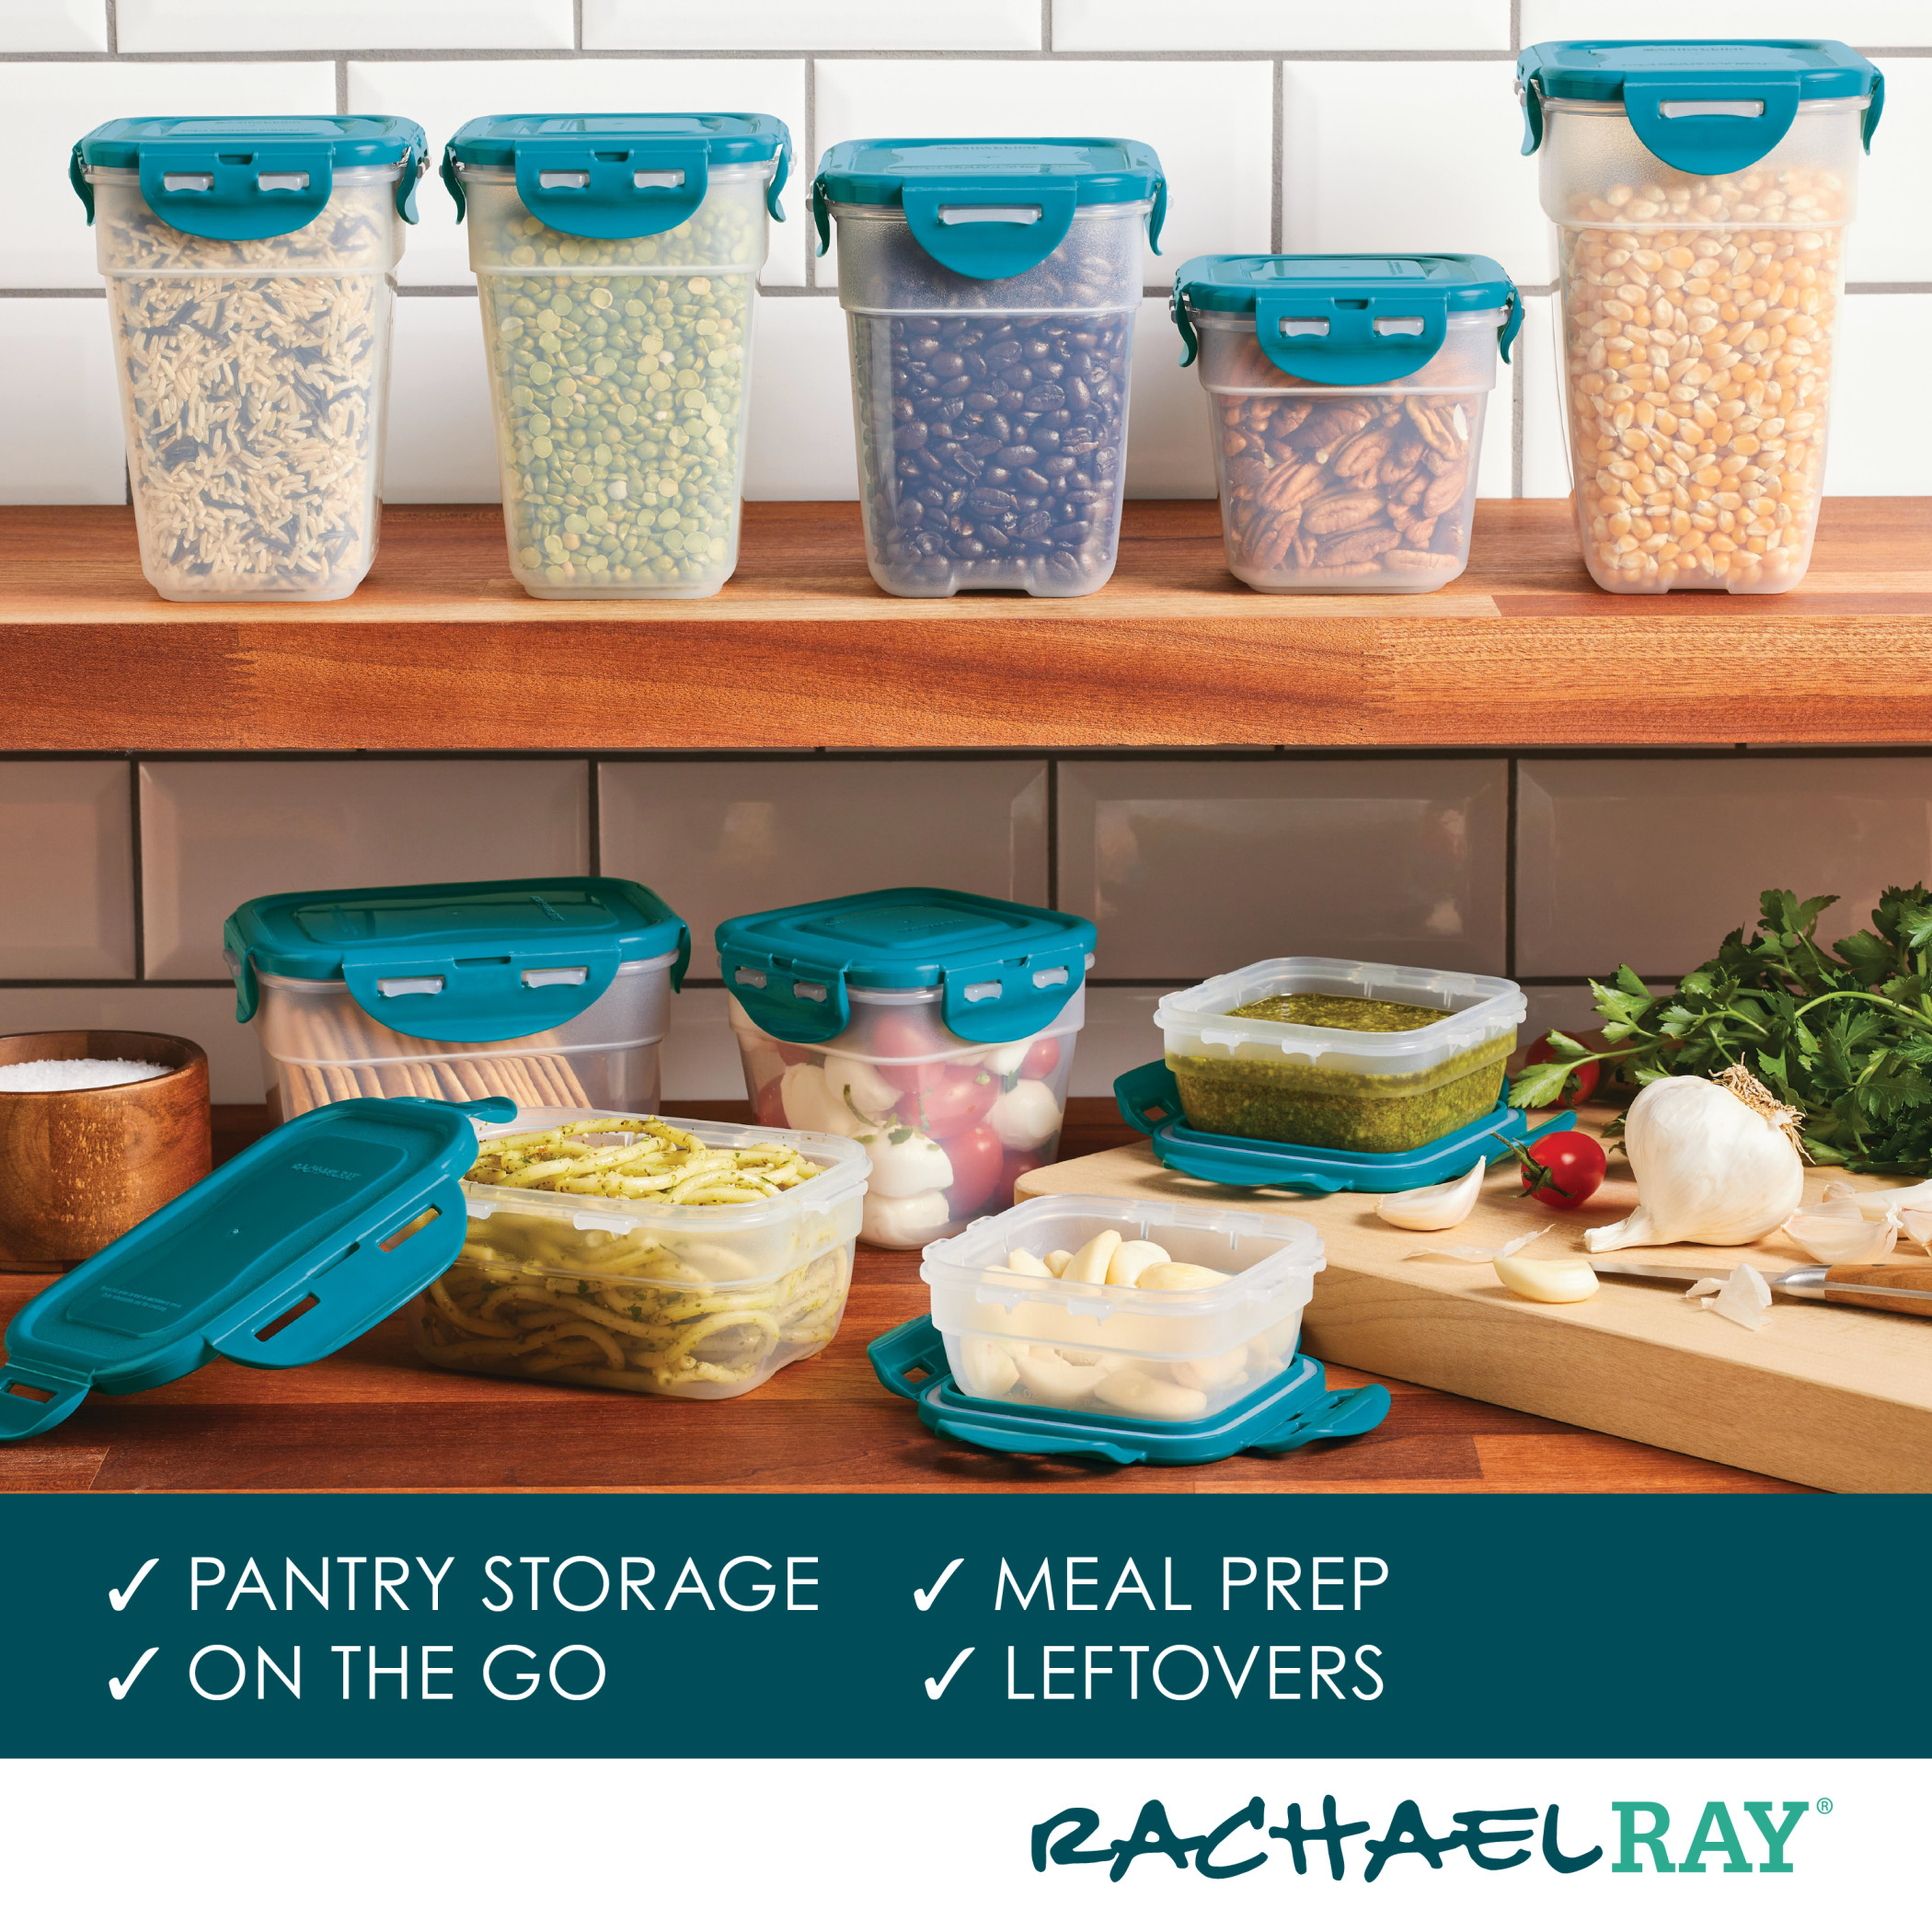 Rachael Ray Leak-Proof Stacking Food Storage Container Set, 20-Piece, Teal Lids - image 5 of 17